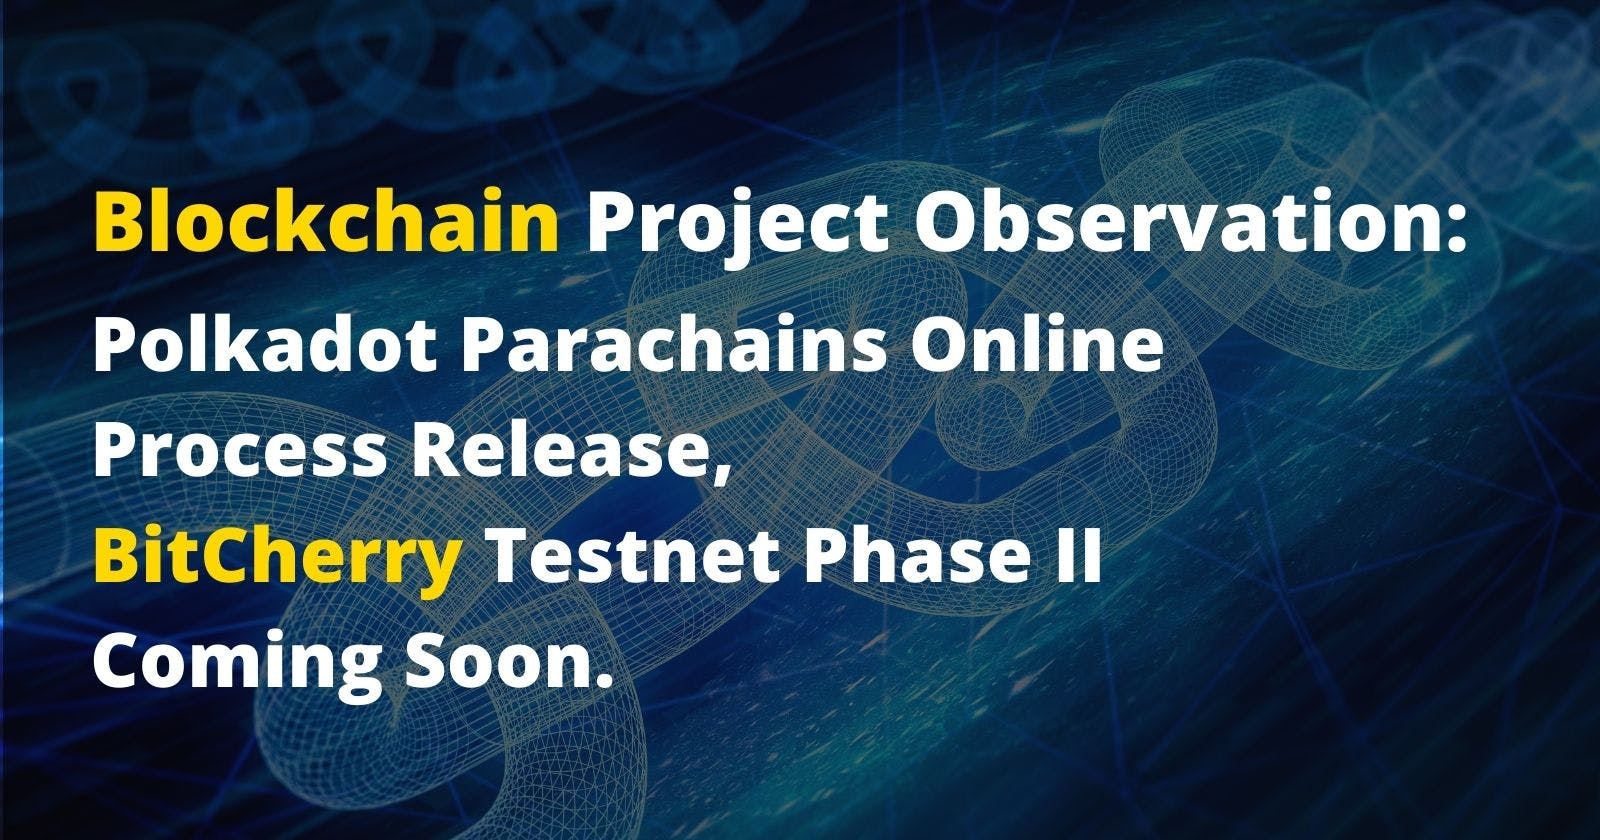 Blockchain Project Observation: Polkadot Parachains Online Process Release, BitCherry Testnet Phase II Coming Soon